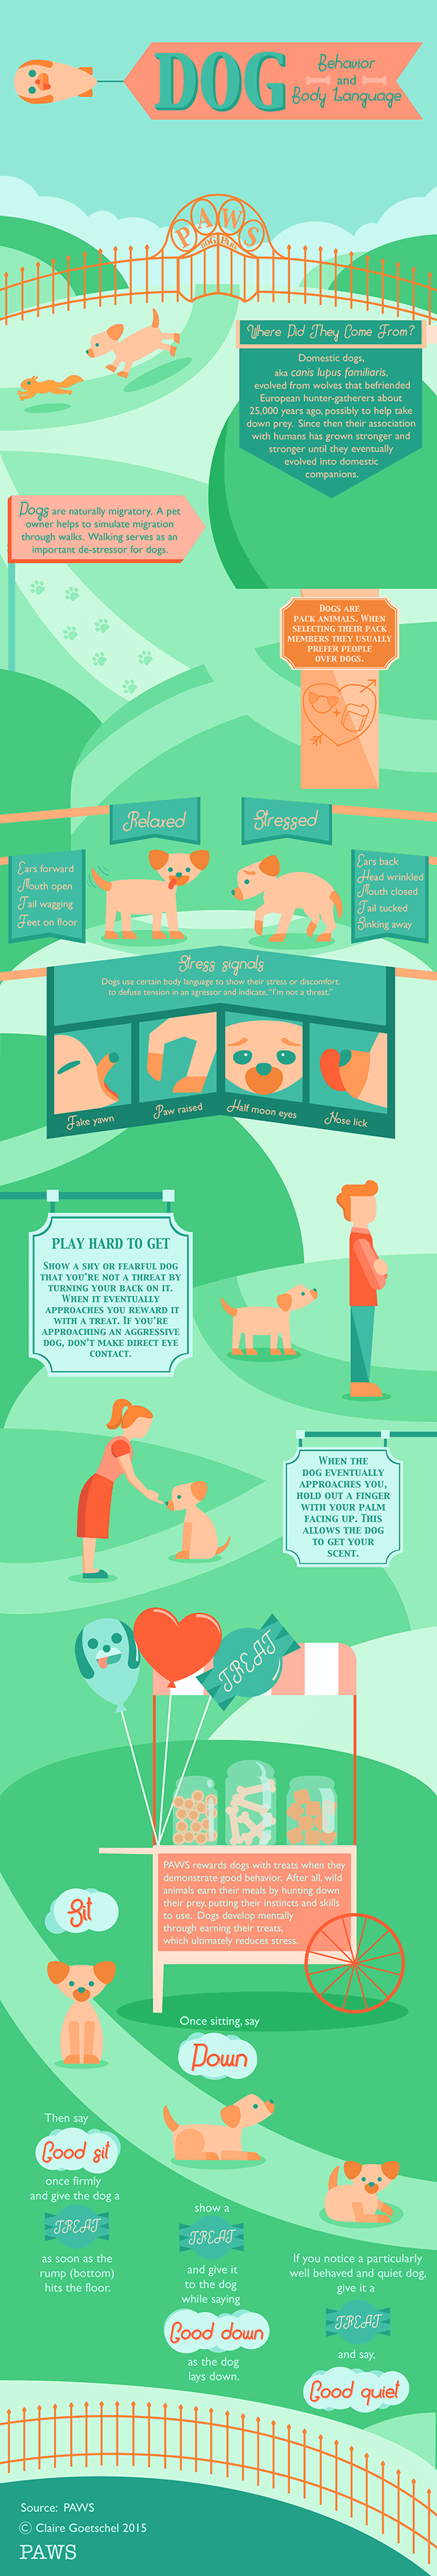 DOG and PUPPY INFOGRAFICS - PRESS TO SEE IN FULL SIZE !!!